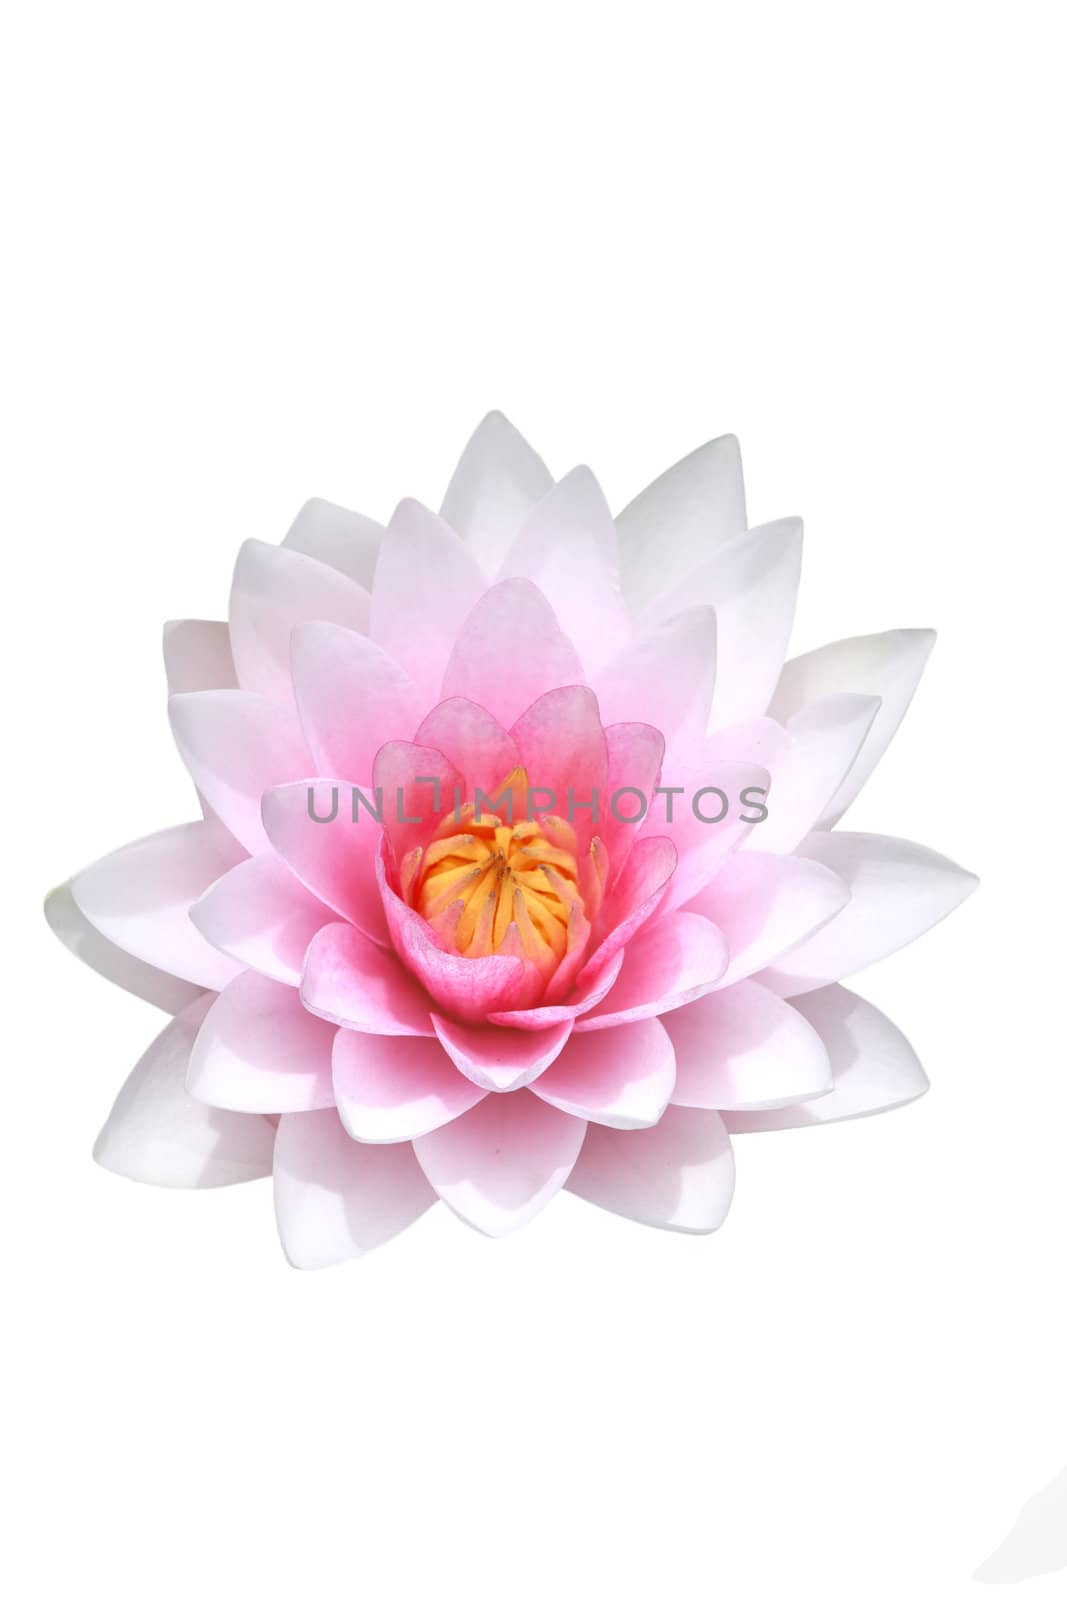 pink water lily isolated on white background